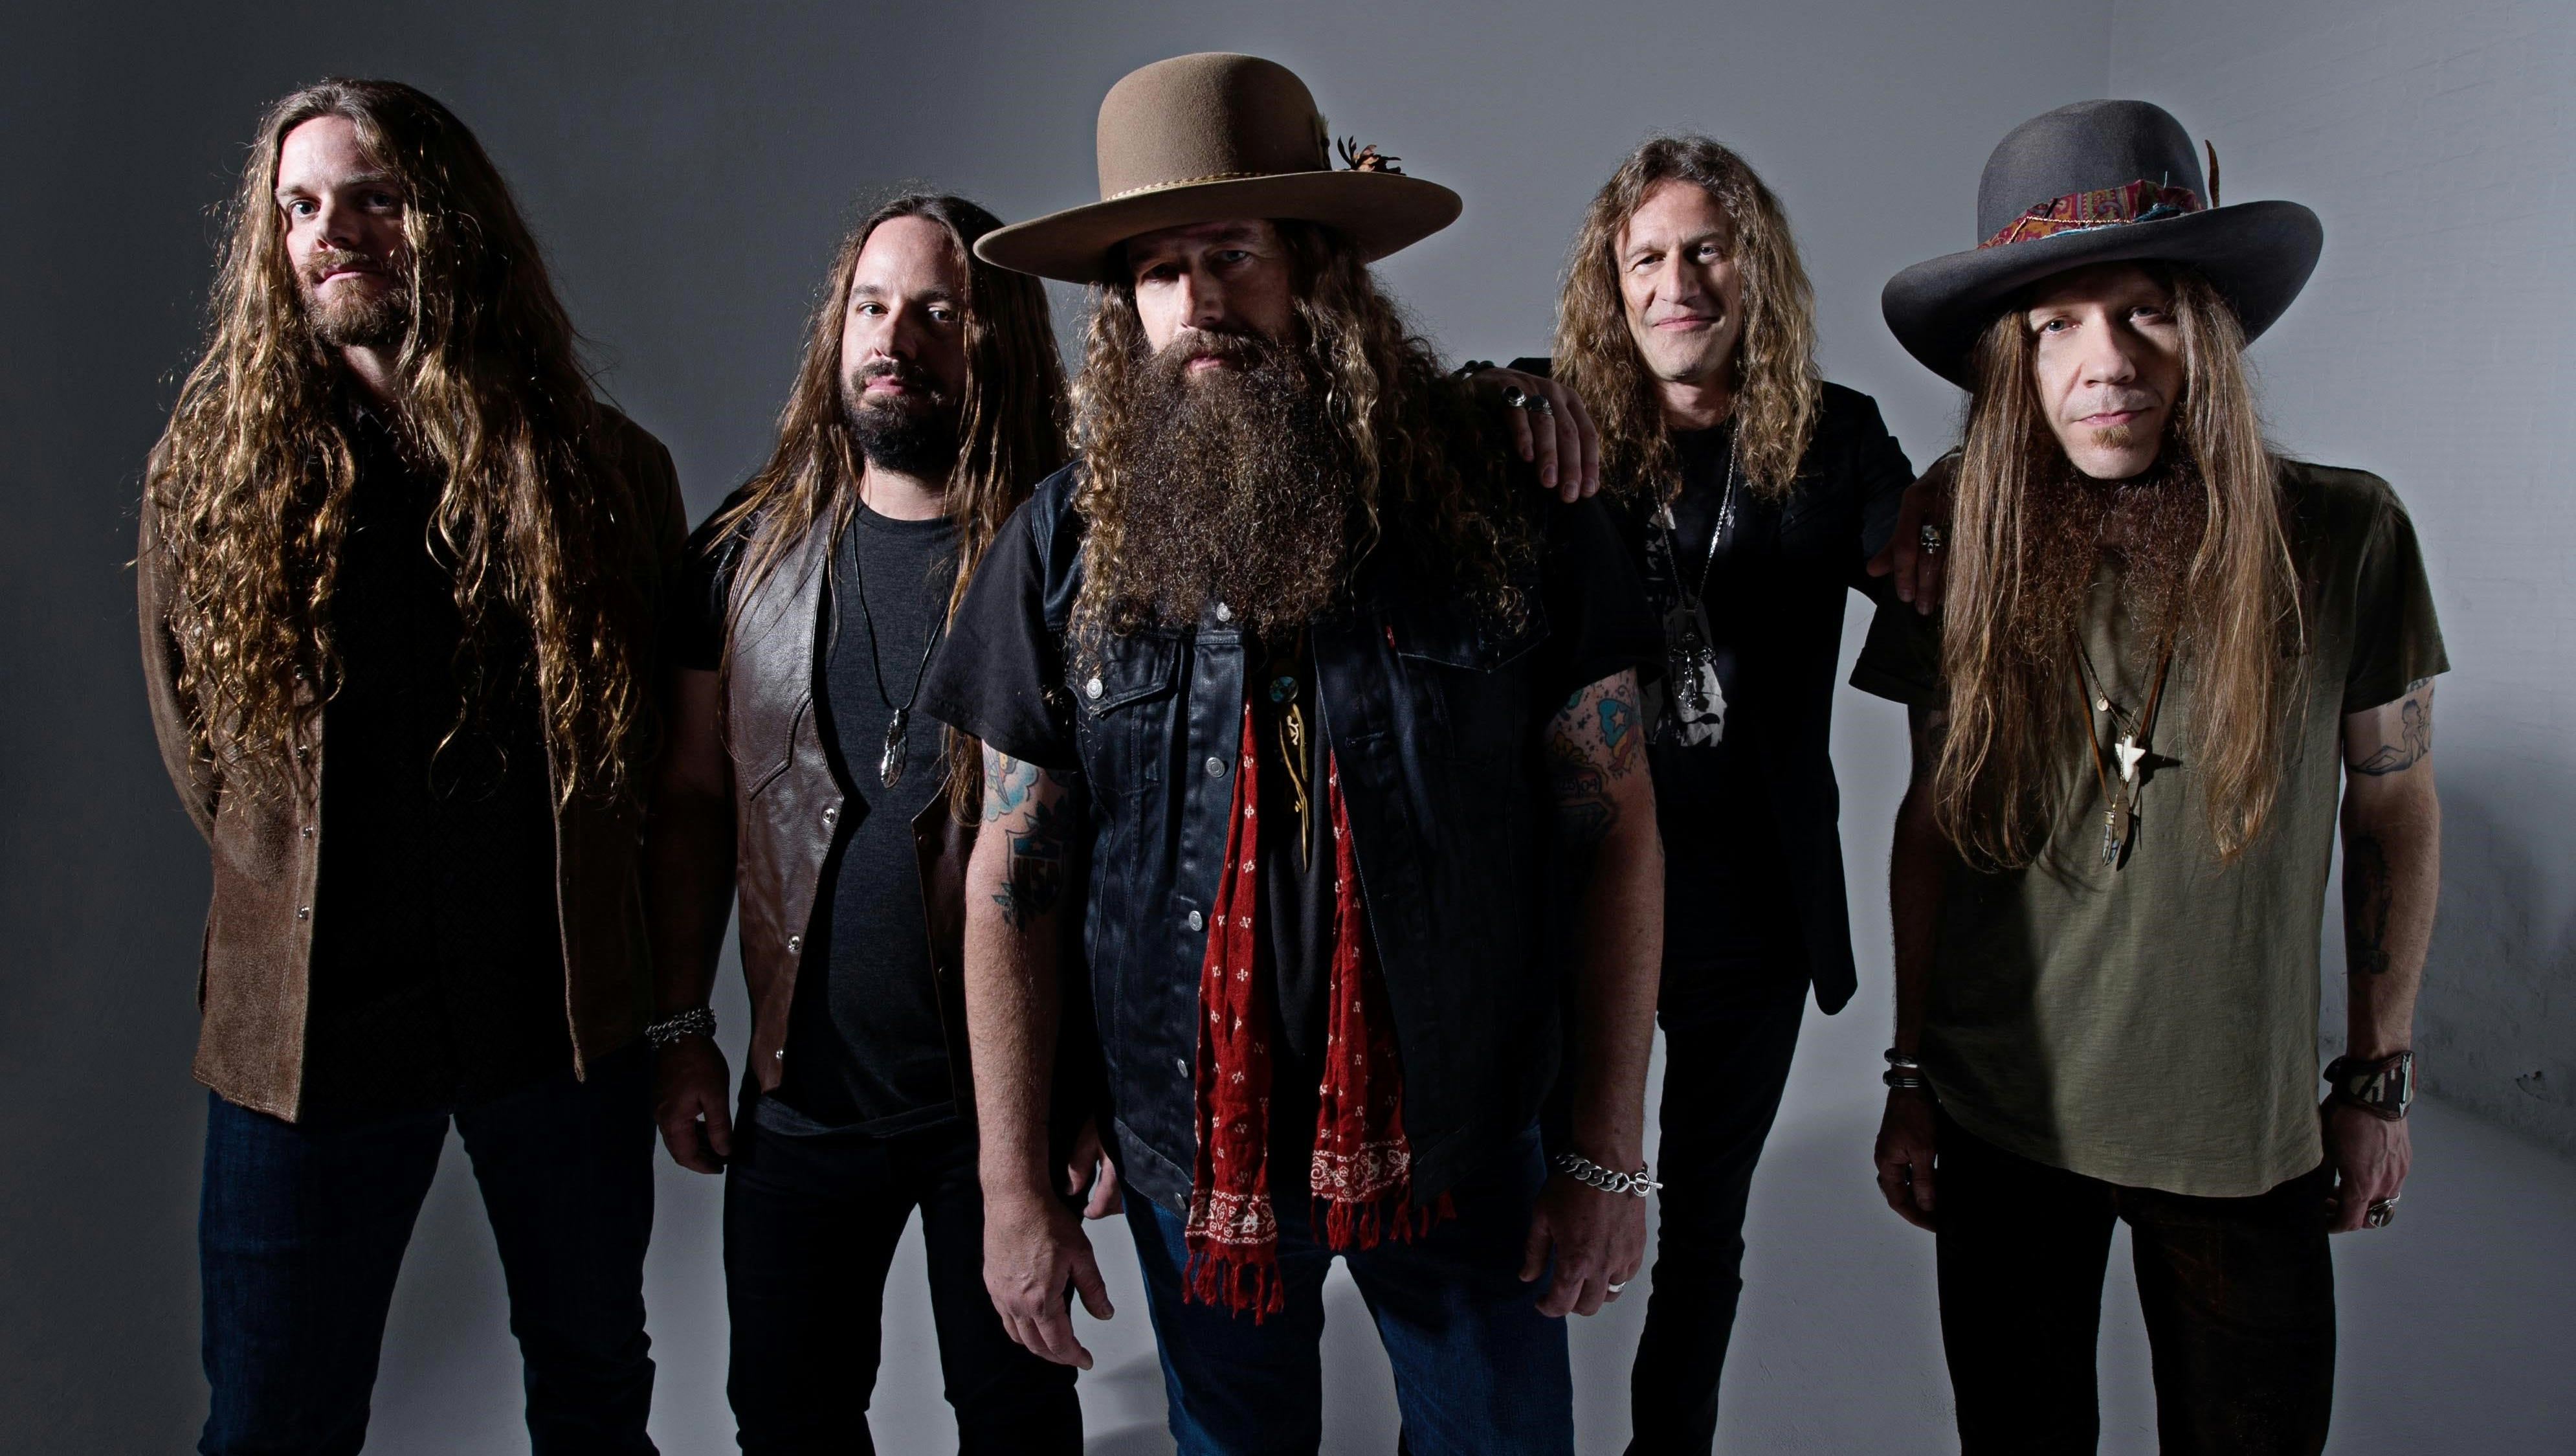 Blackberry Smoke Events, Tickets, Tour Dates & Concerts in